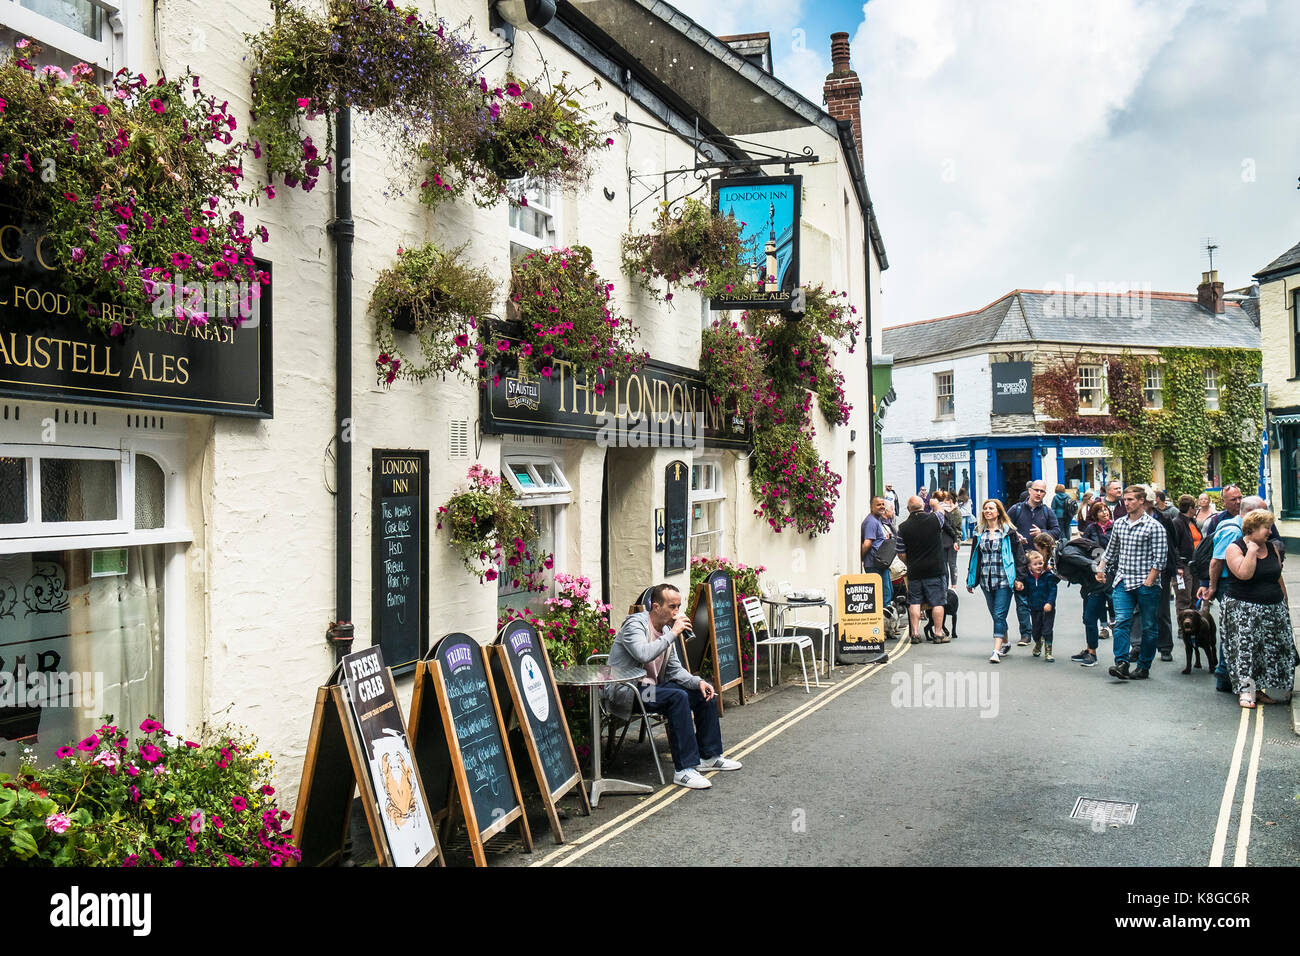 Historic pub - the historic London Inn public house in Padstow on the North Cornwall coast. Stock Photo